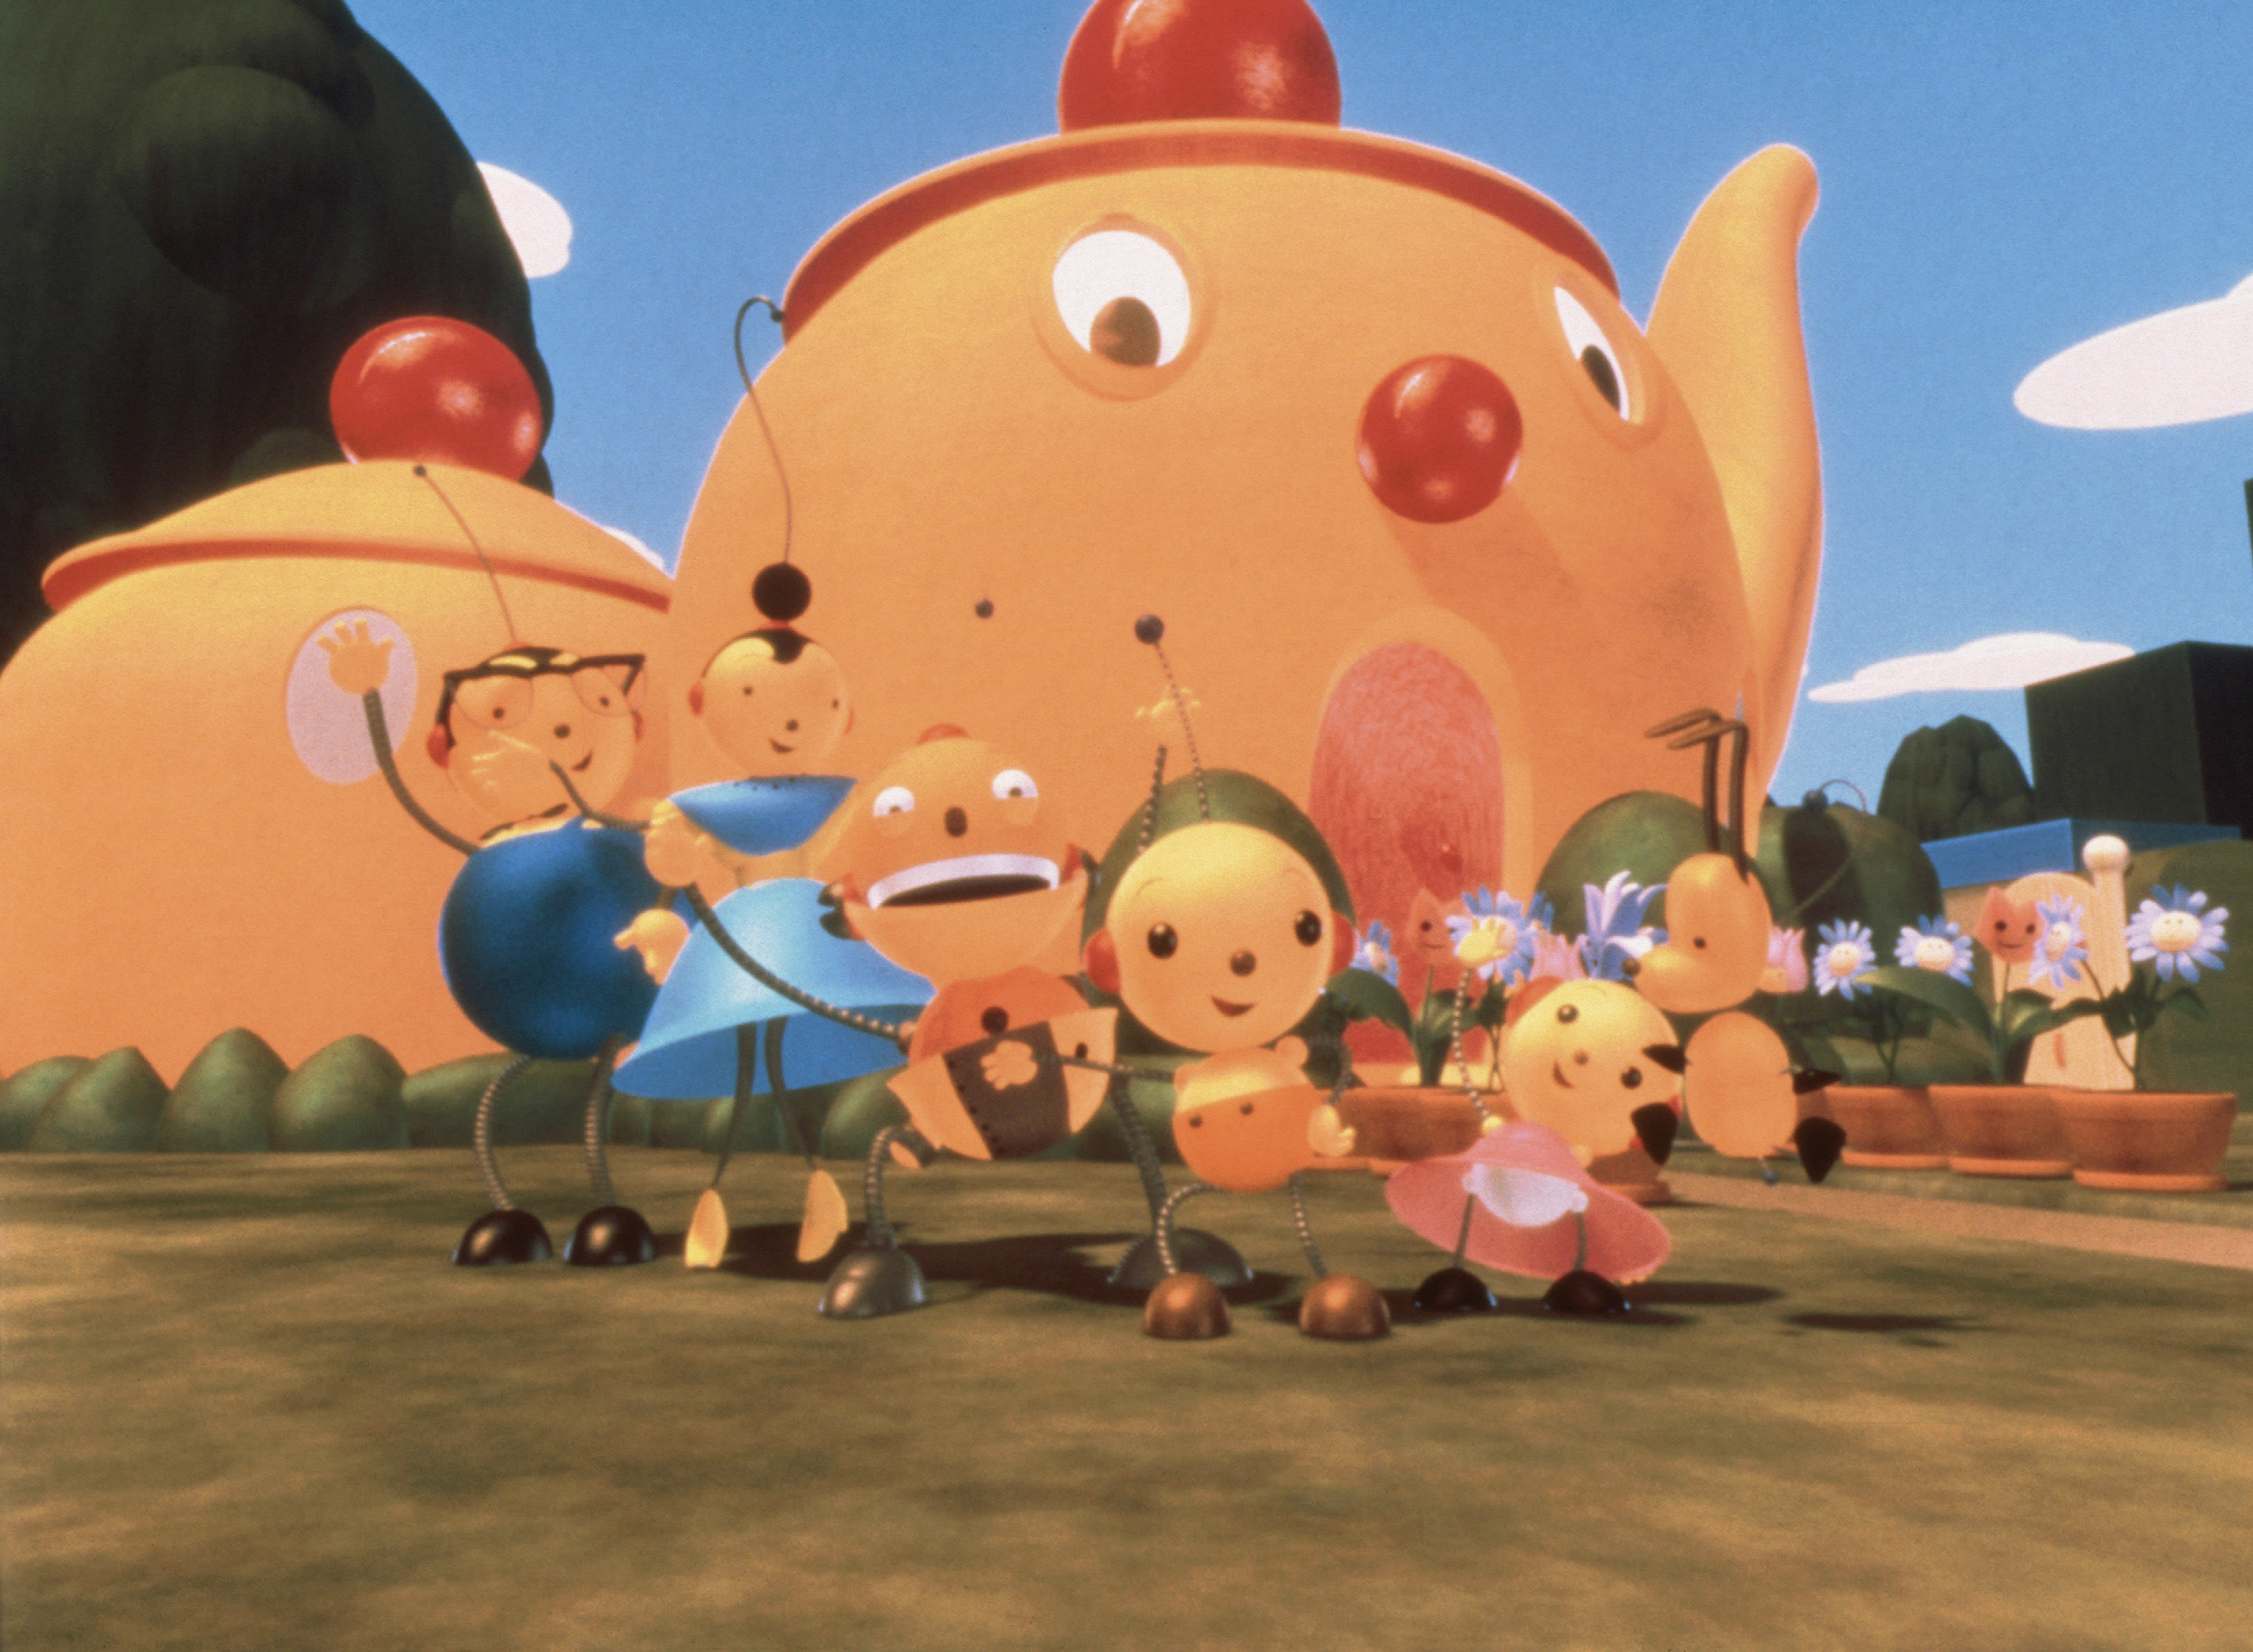 Animated characters from &quot;Rolie Polie Olie&quot; posing together on a sunny day, with Olie, Zowie, and Pappy in the foreground